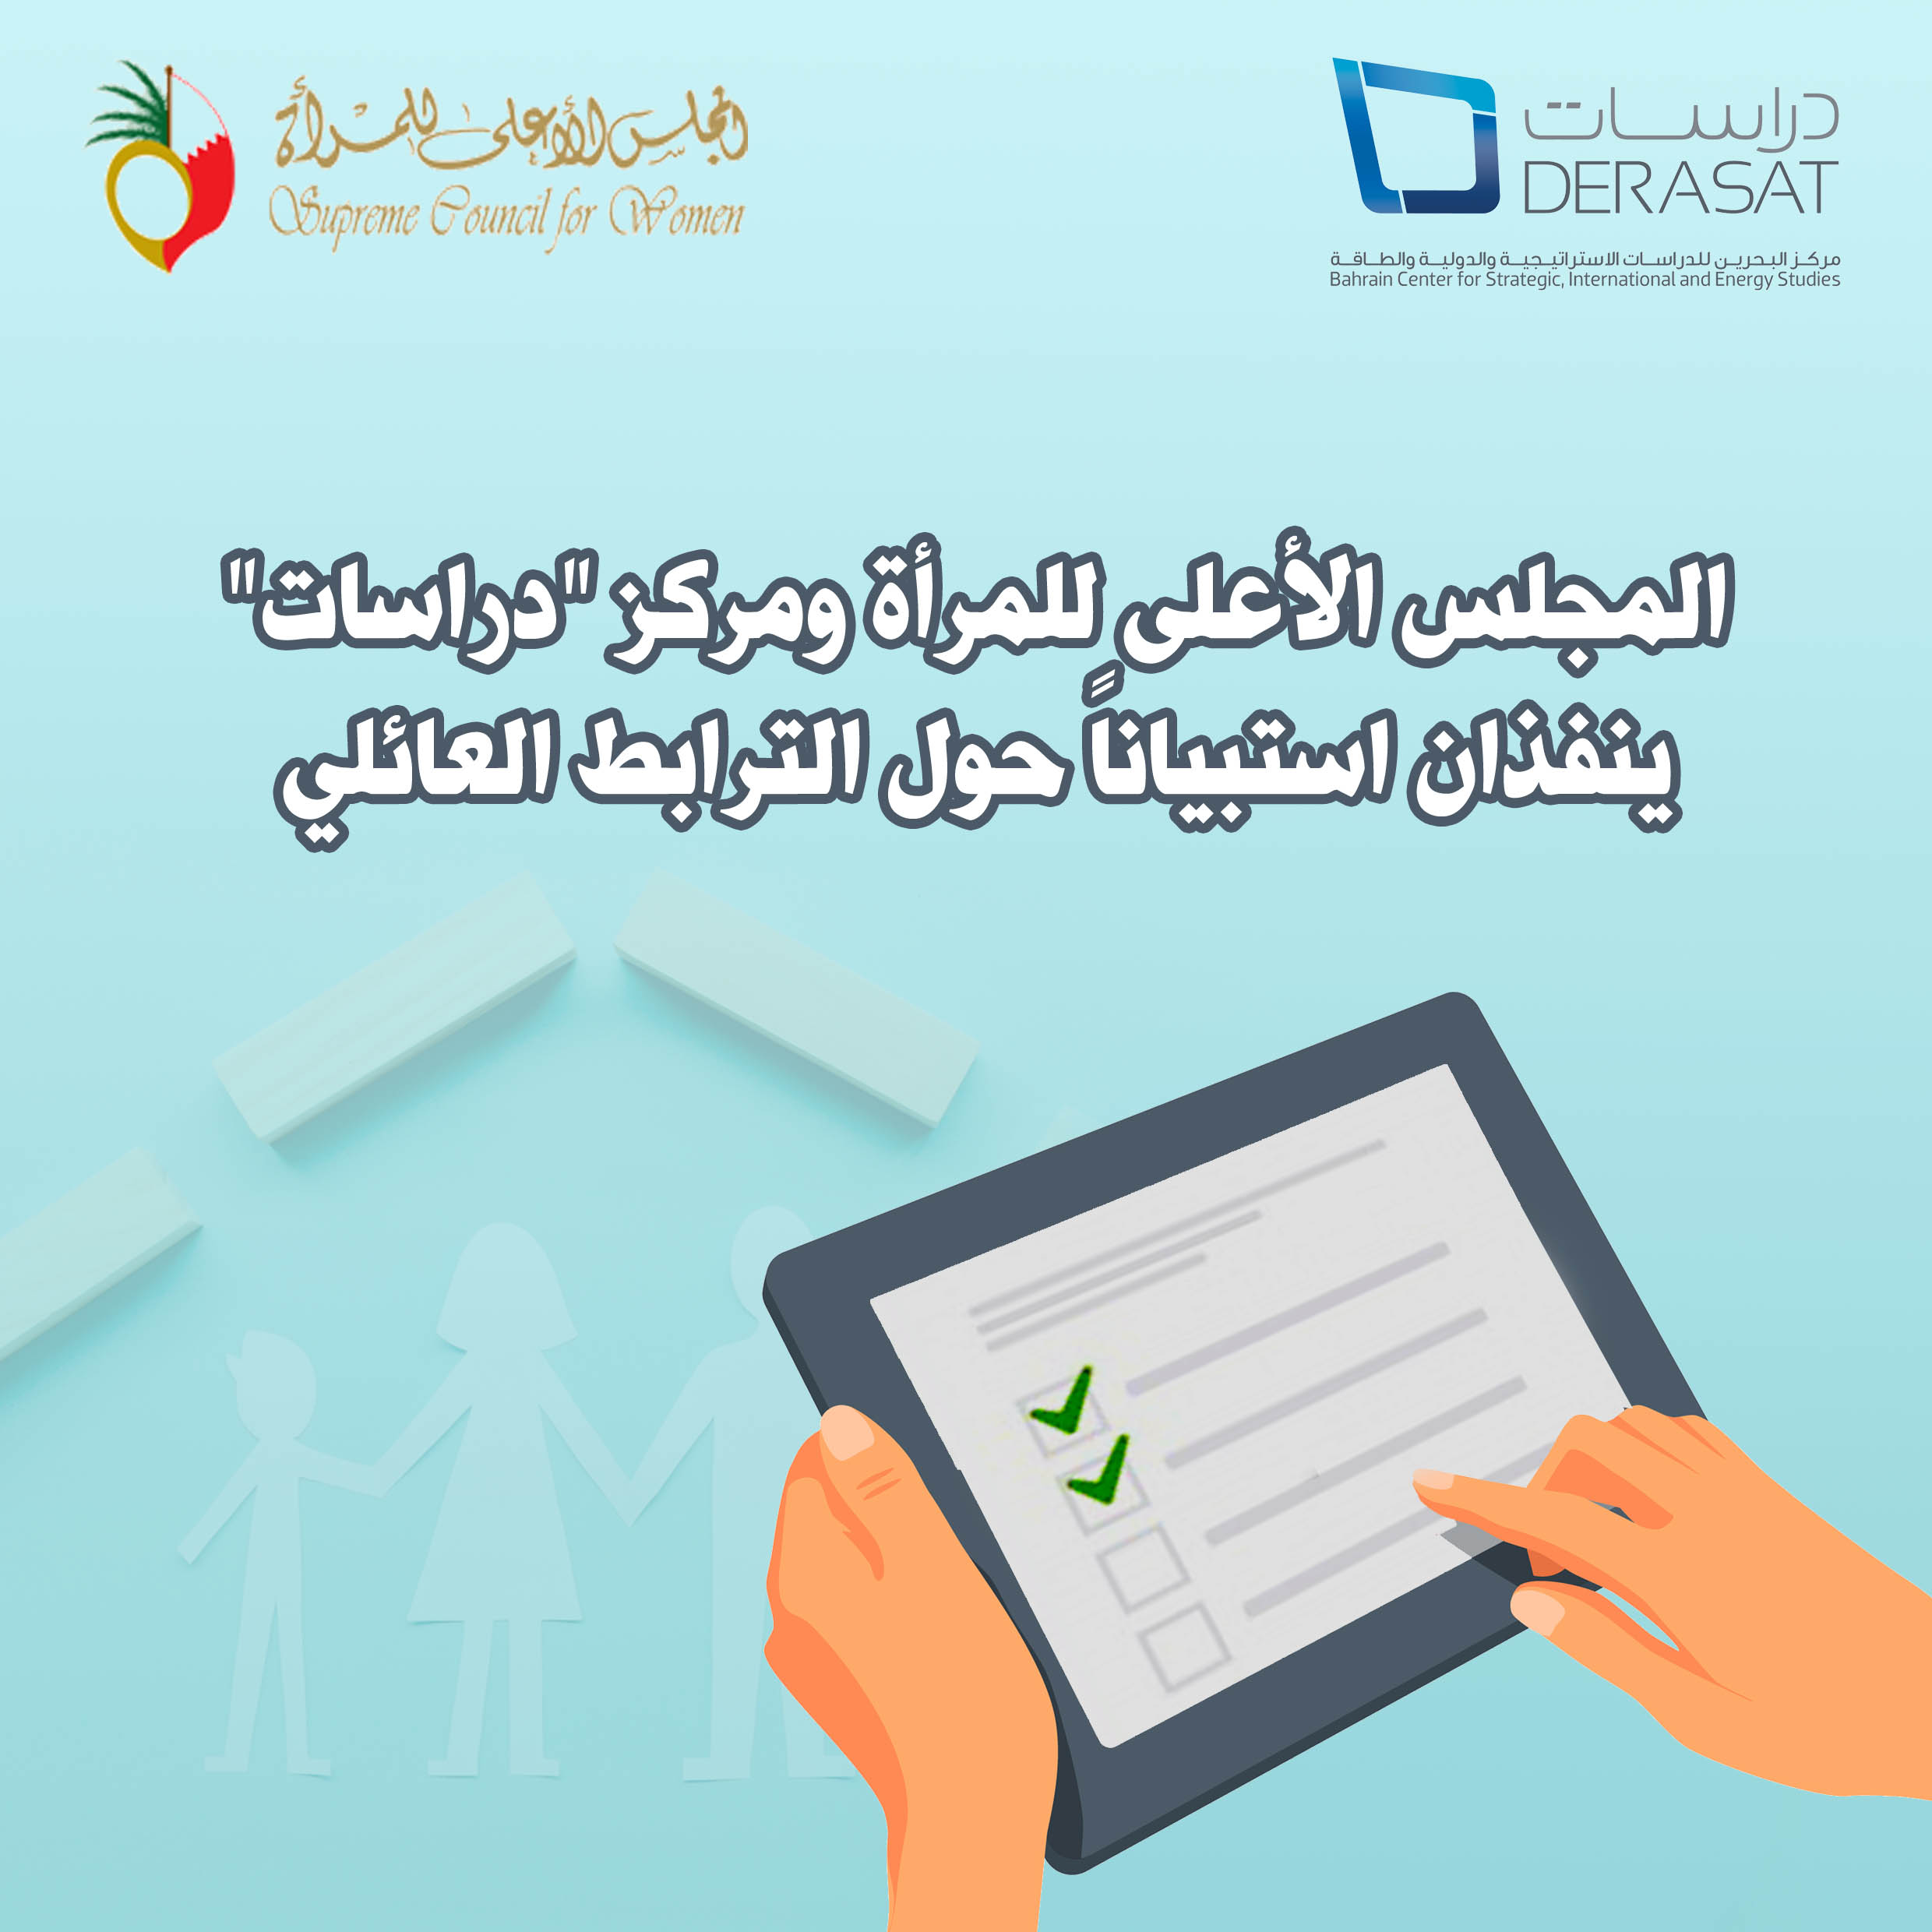 Supreme Council for Women and Derasat  Conduct A Survey on Family Cohesion